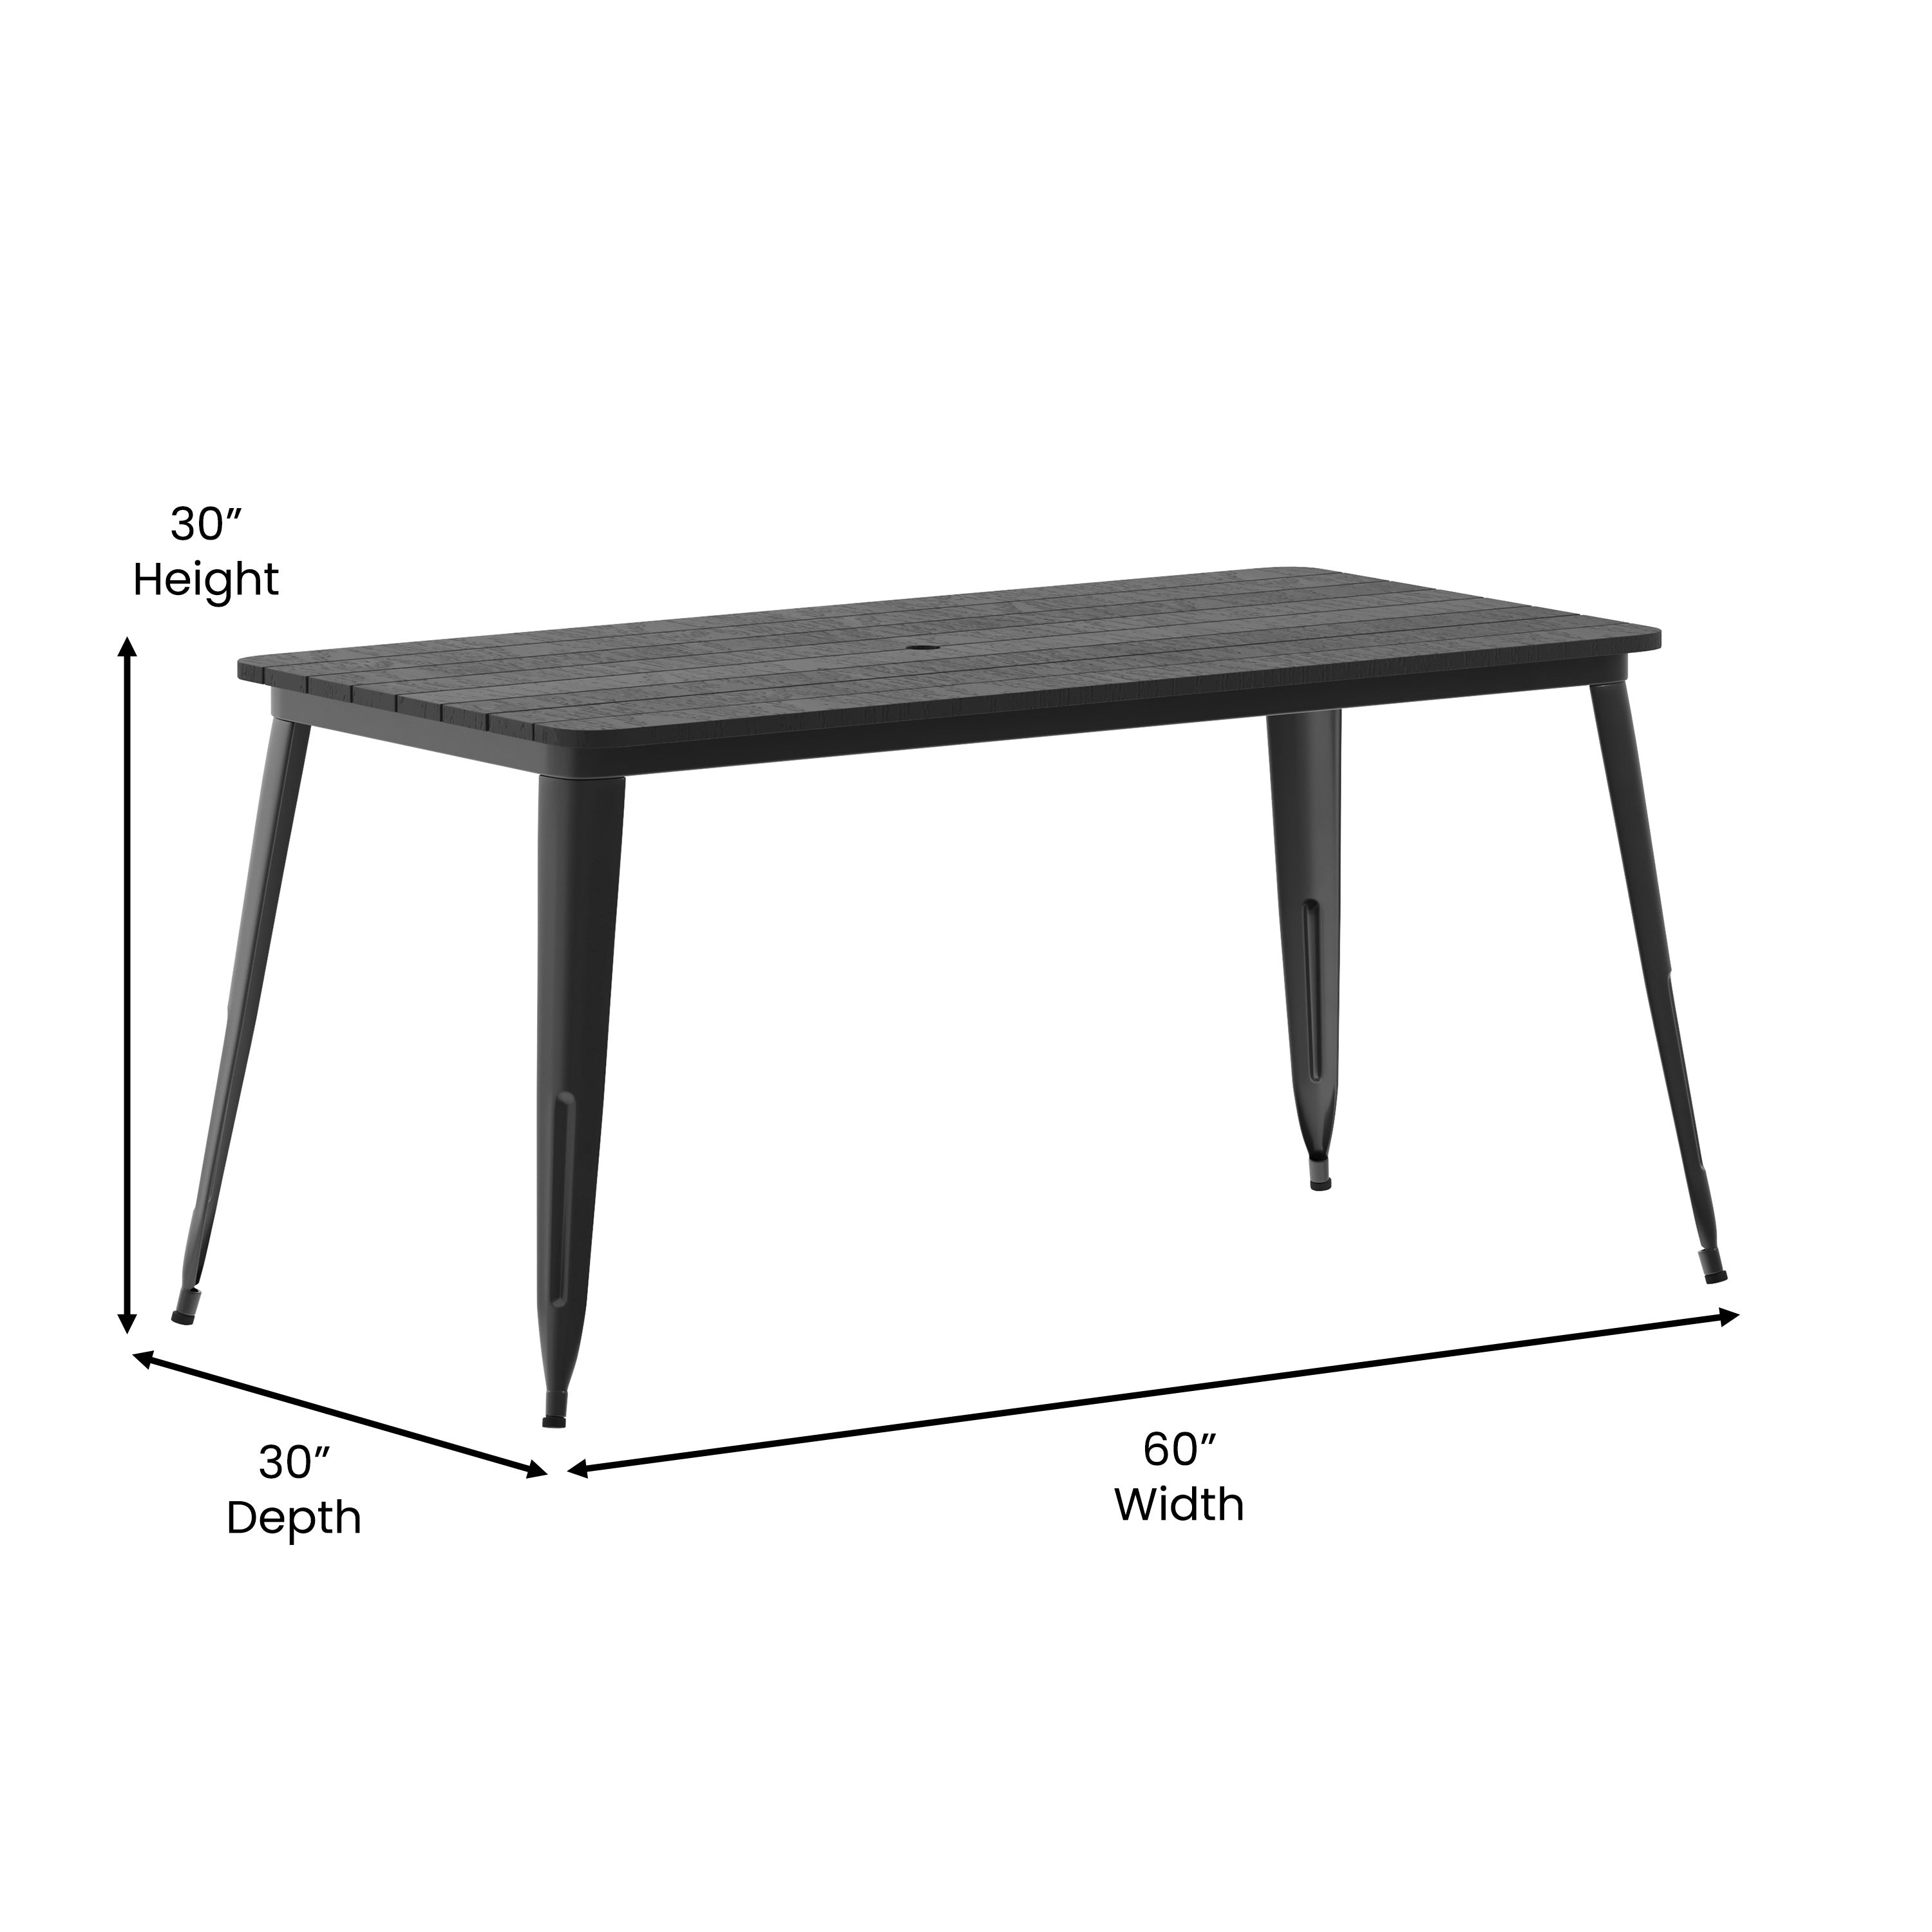 Declan Commercial Indoor/Outdoor Dining Table with Umbrella Hole, 30" x 60" All Weather Poly Resin Top and Steel Base-Metal Colorful Restaurant Table-Flash Furniture-Wall2Wall Furnishings